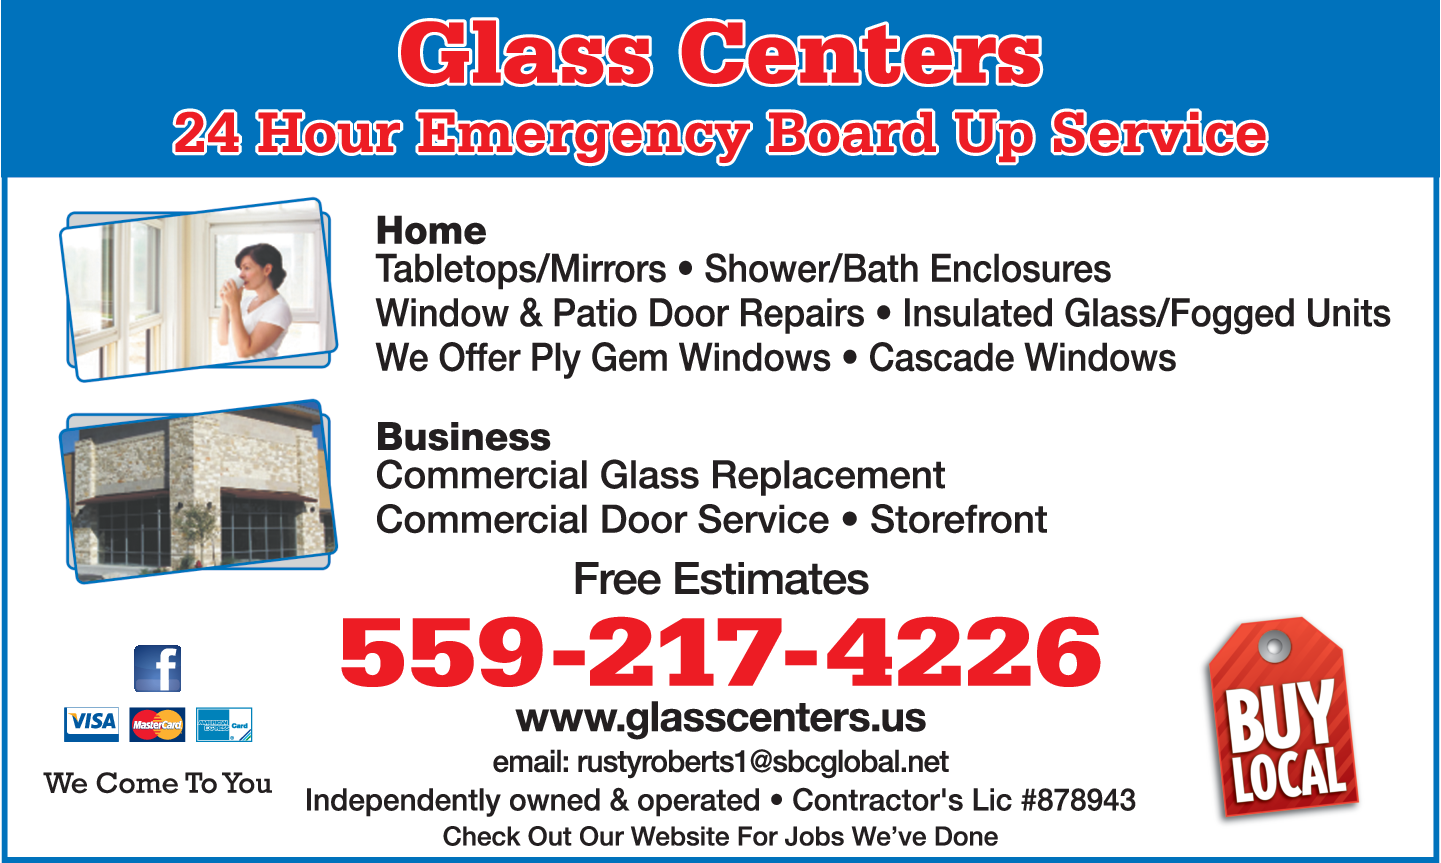 Glass Centers